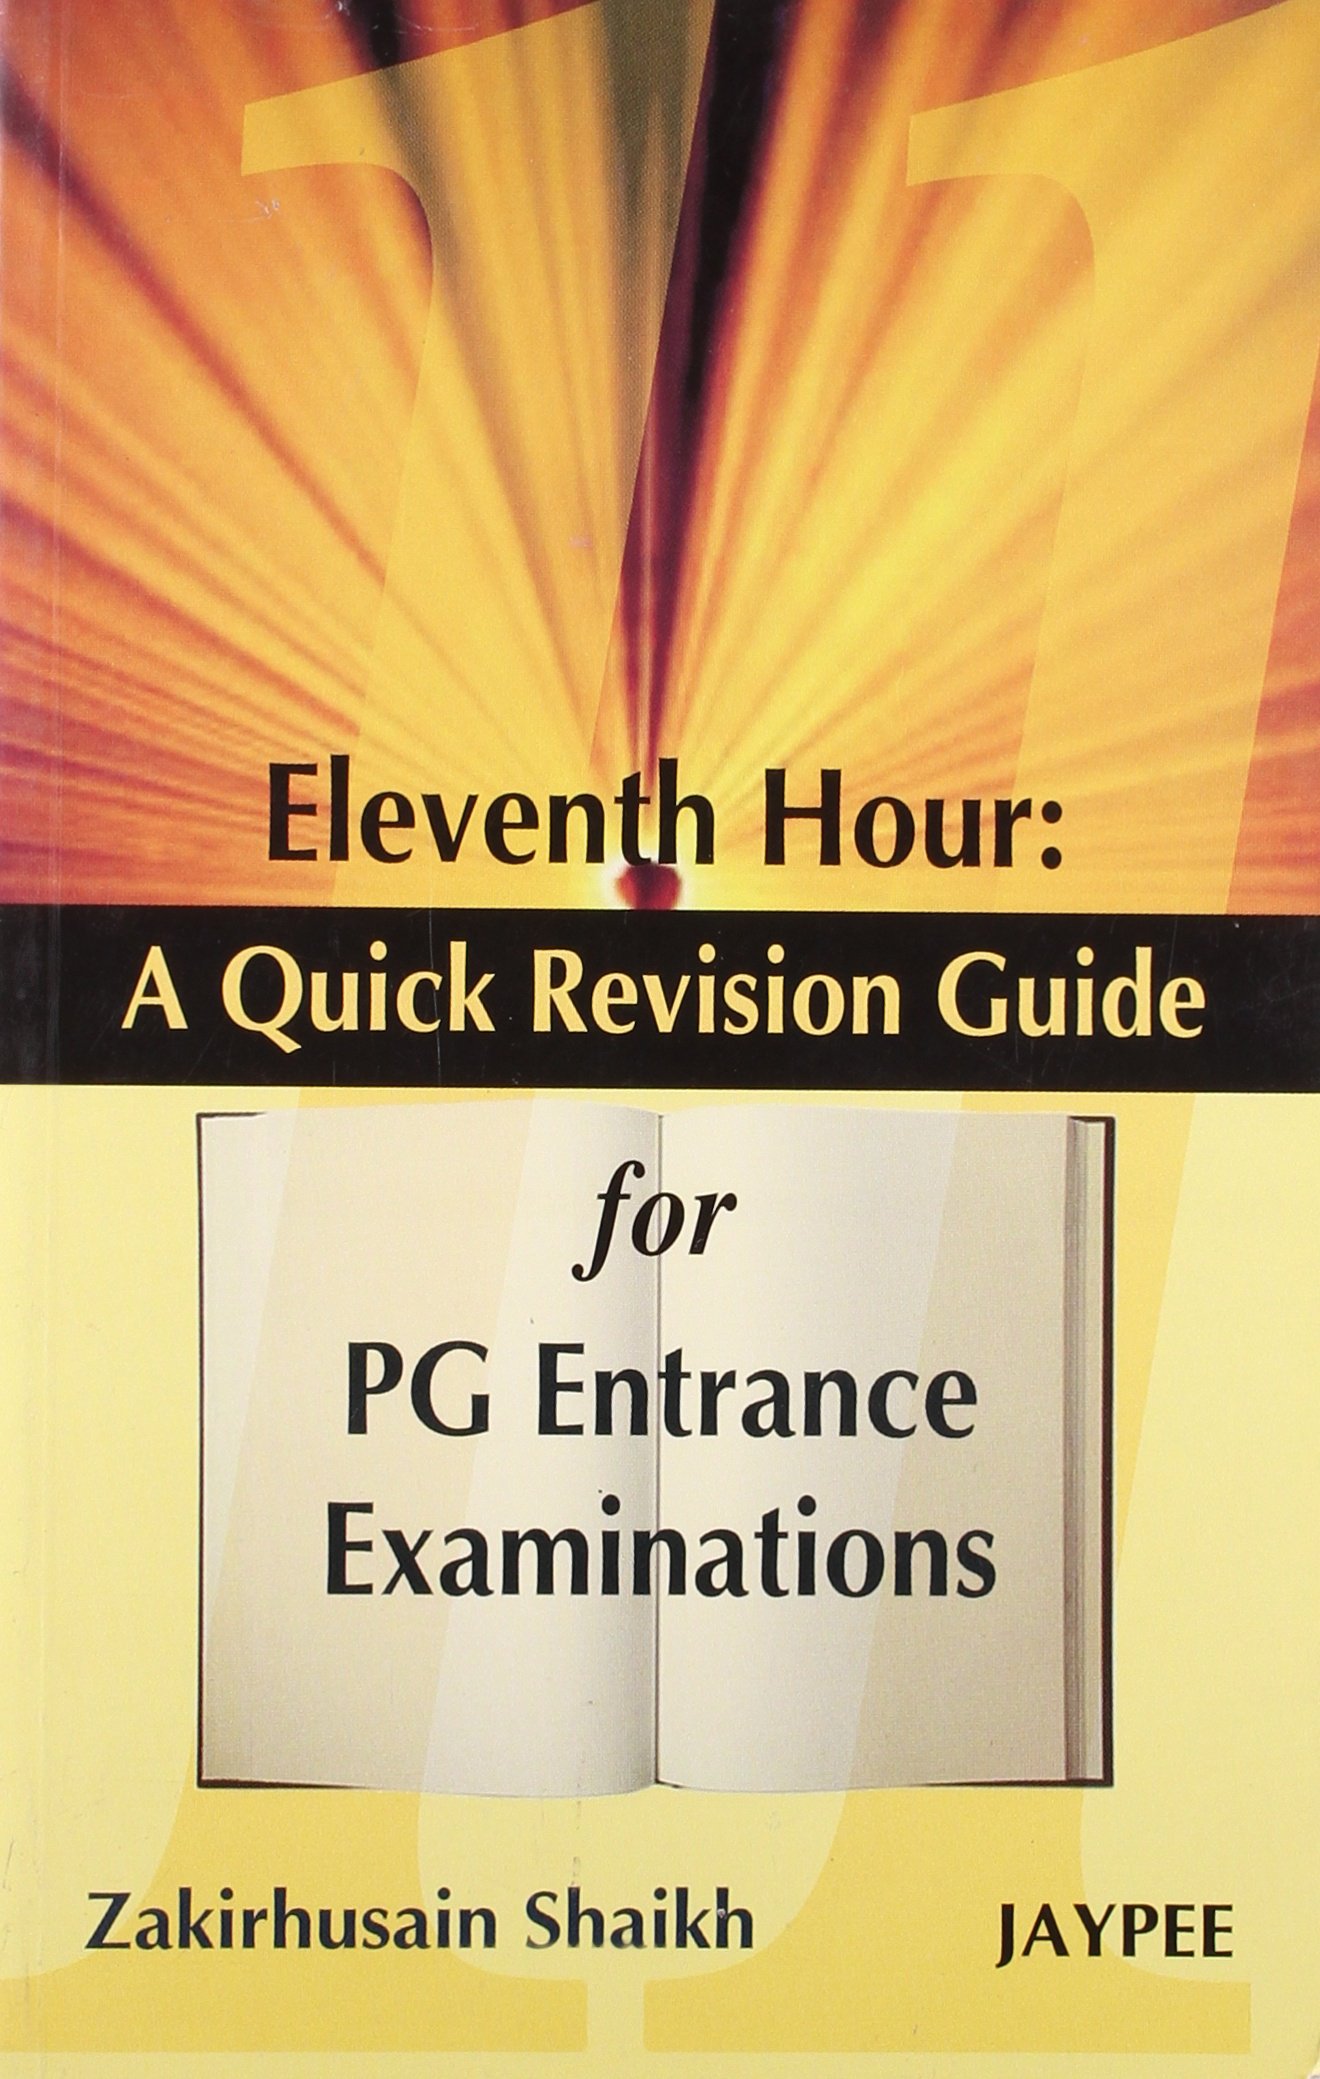 eleventh-hour-a-quick-revision-guide-for-pg-entrance-examinations